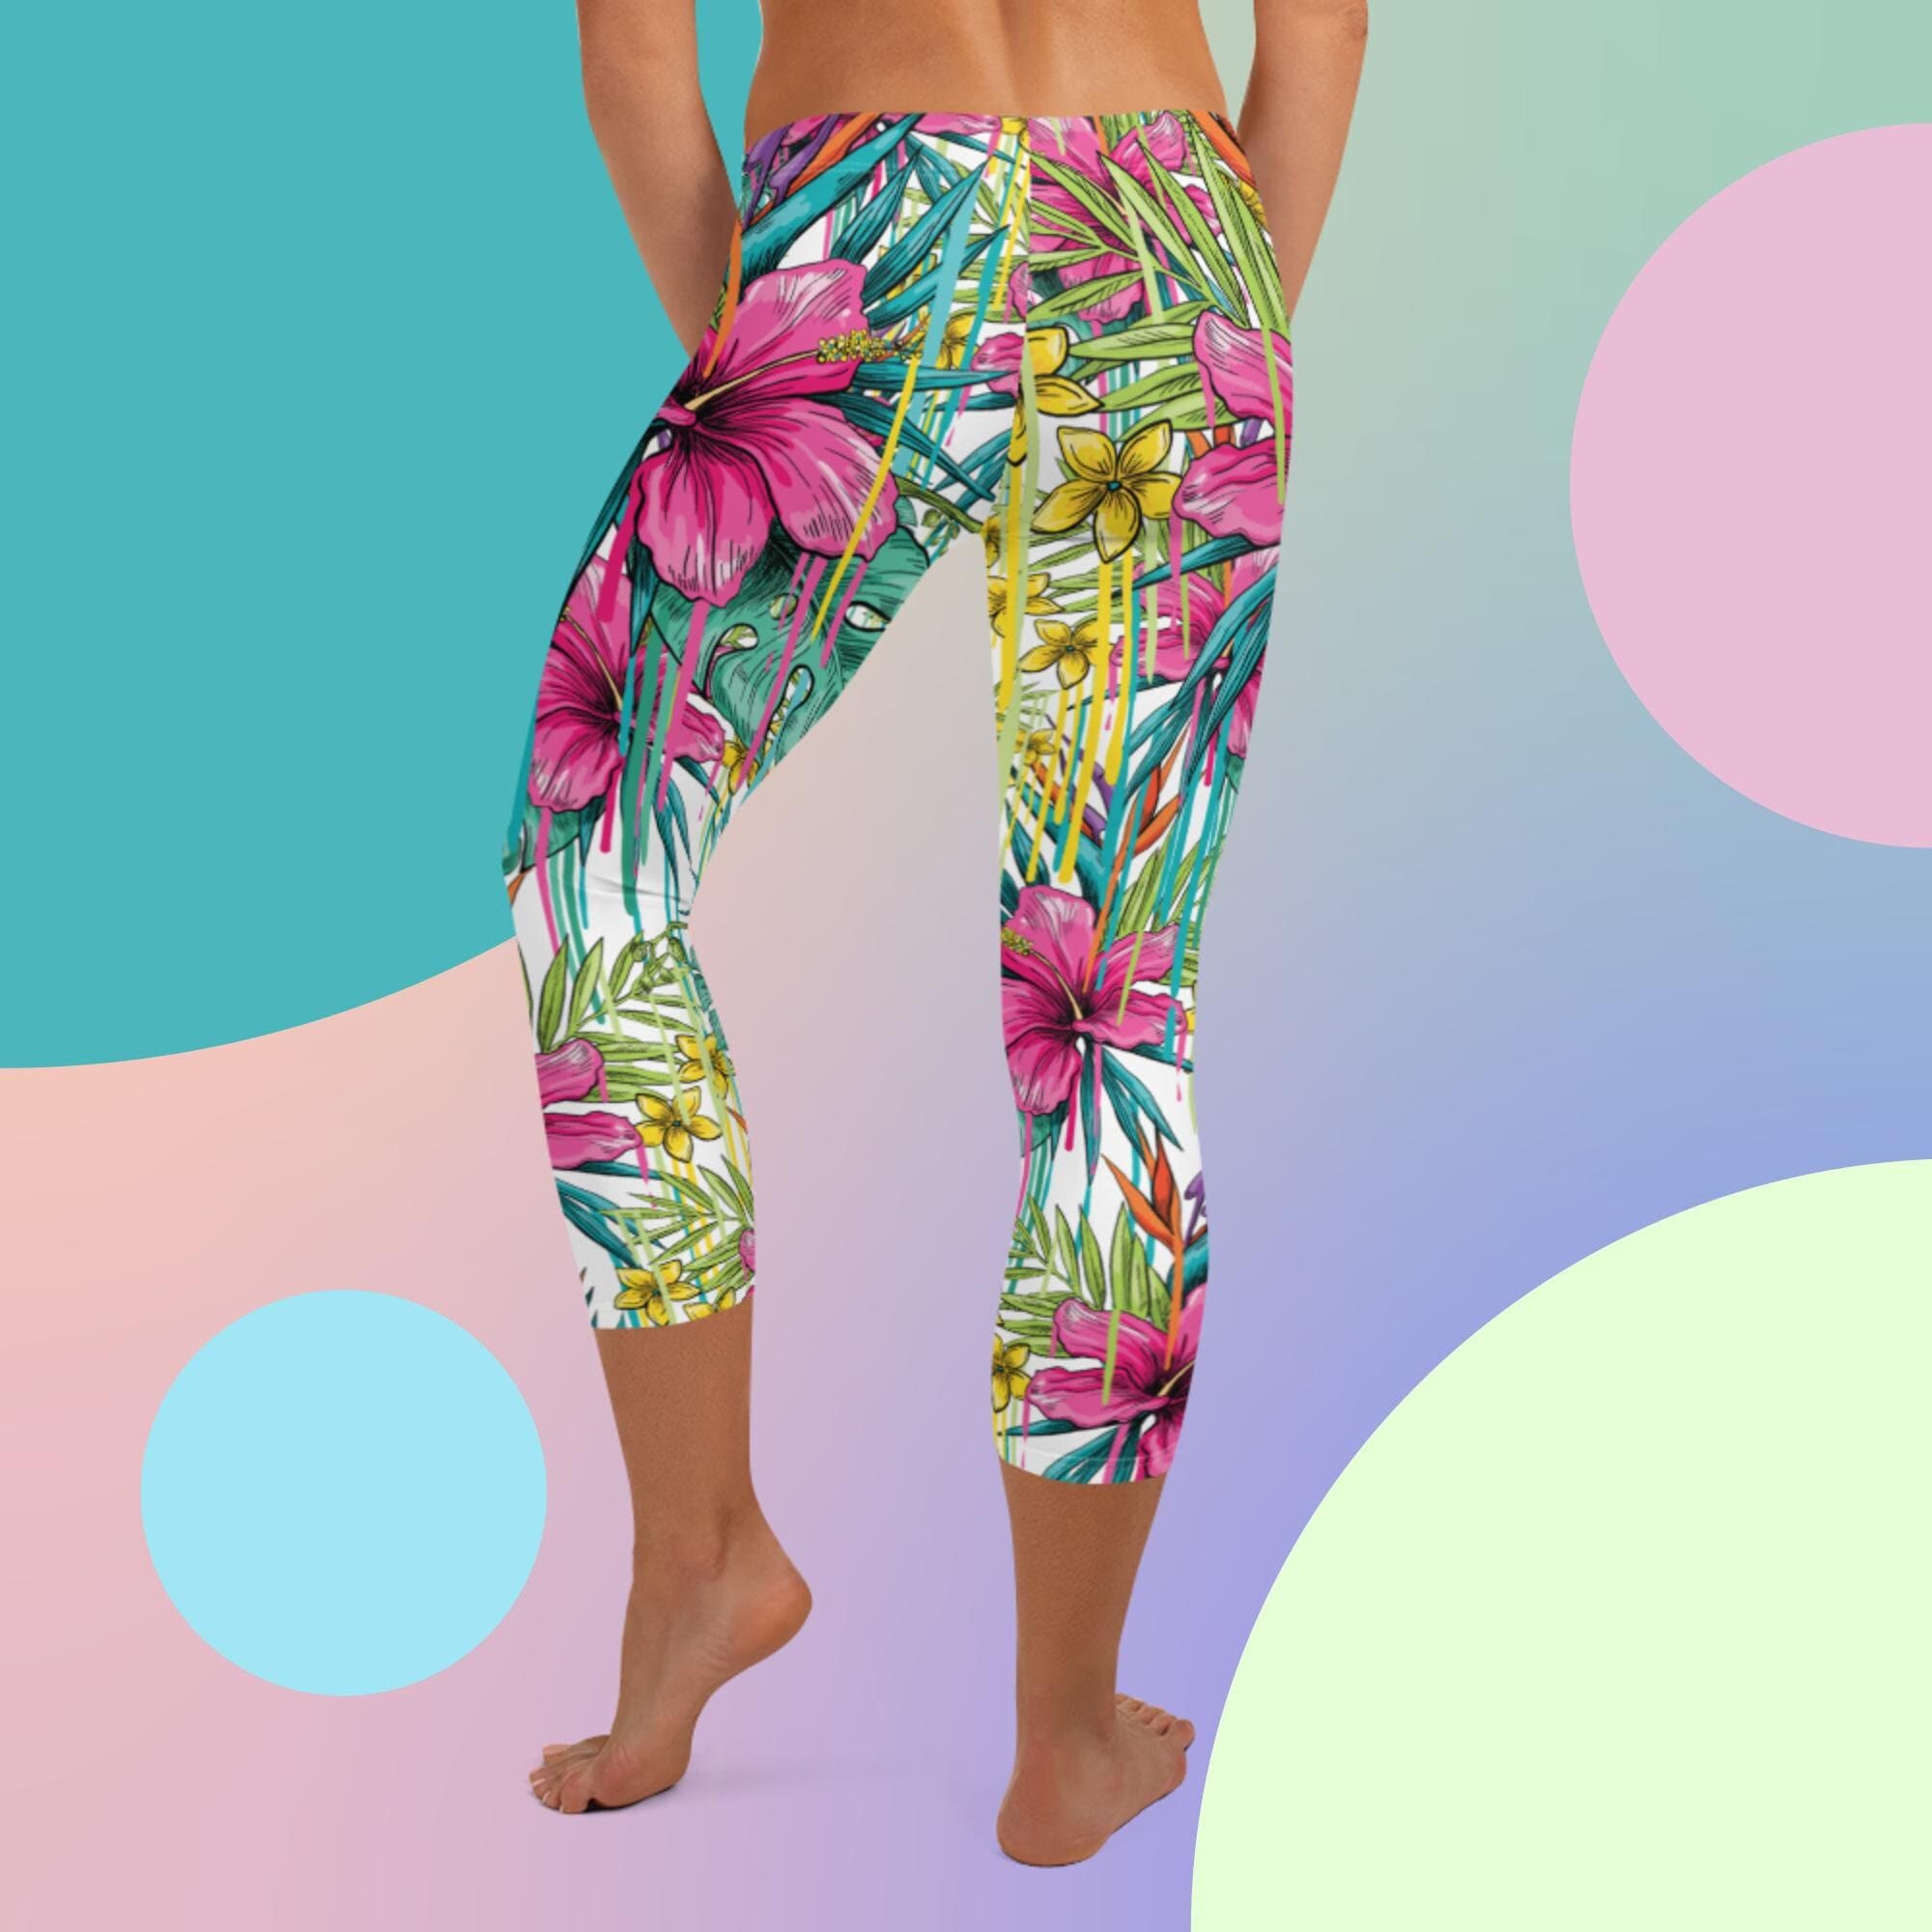 New Wave Glam Rock Totally 80s Look Skinny Legging Style Pants to wear with  your Vintage Ugly Christmas Sweater: Totally -E-Fashion- Unisex black,  white, blue, neon orange, bright purple and neon green